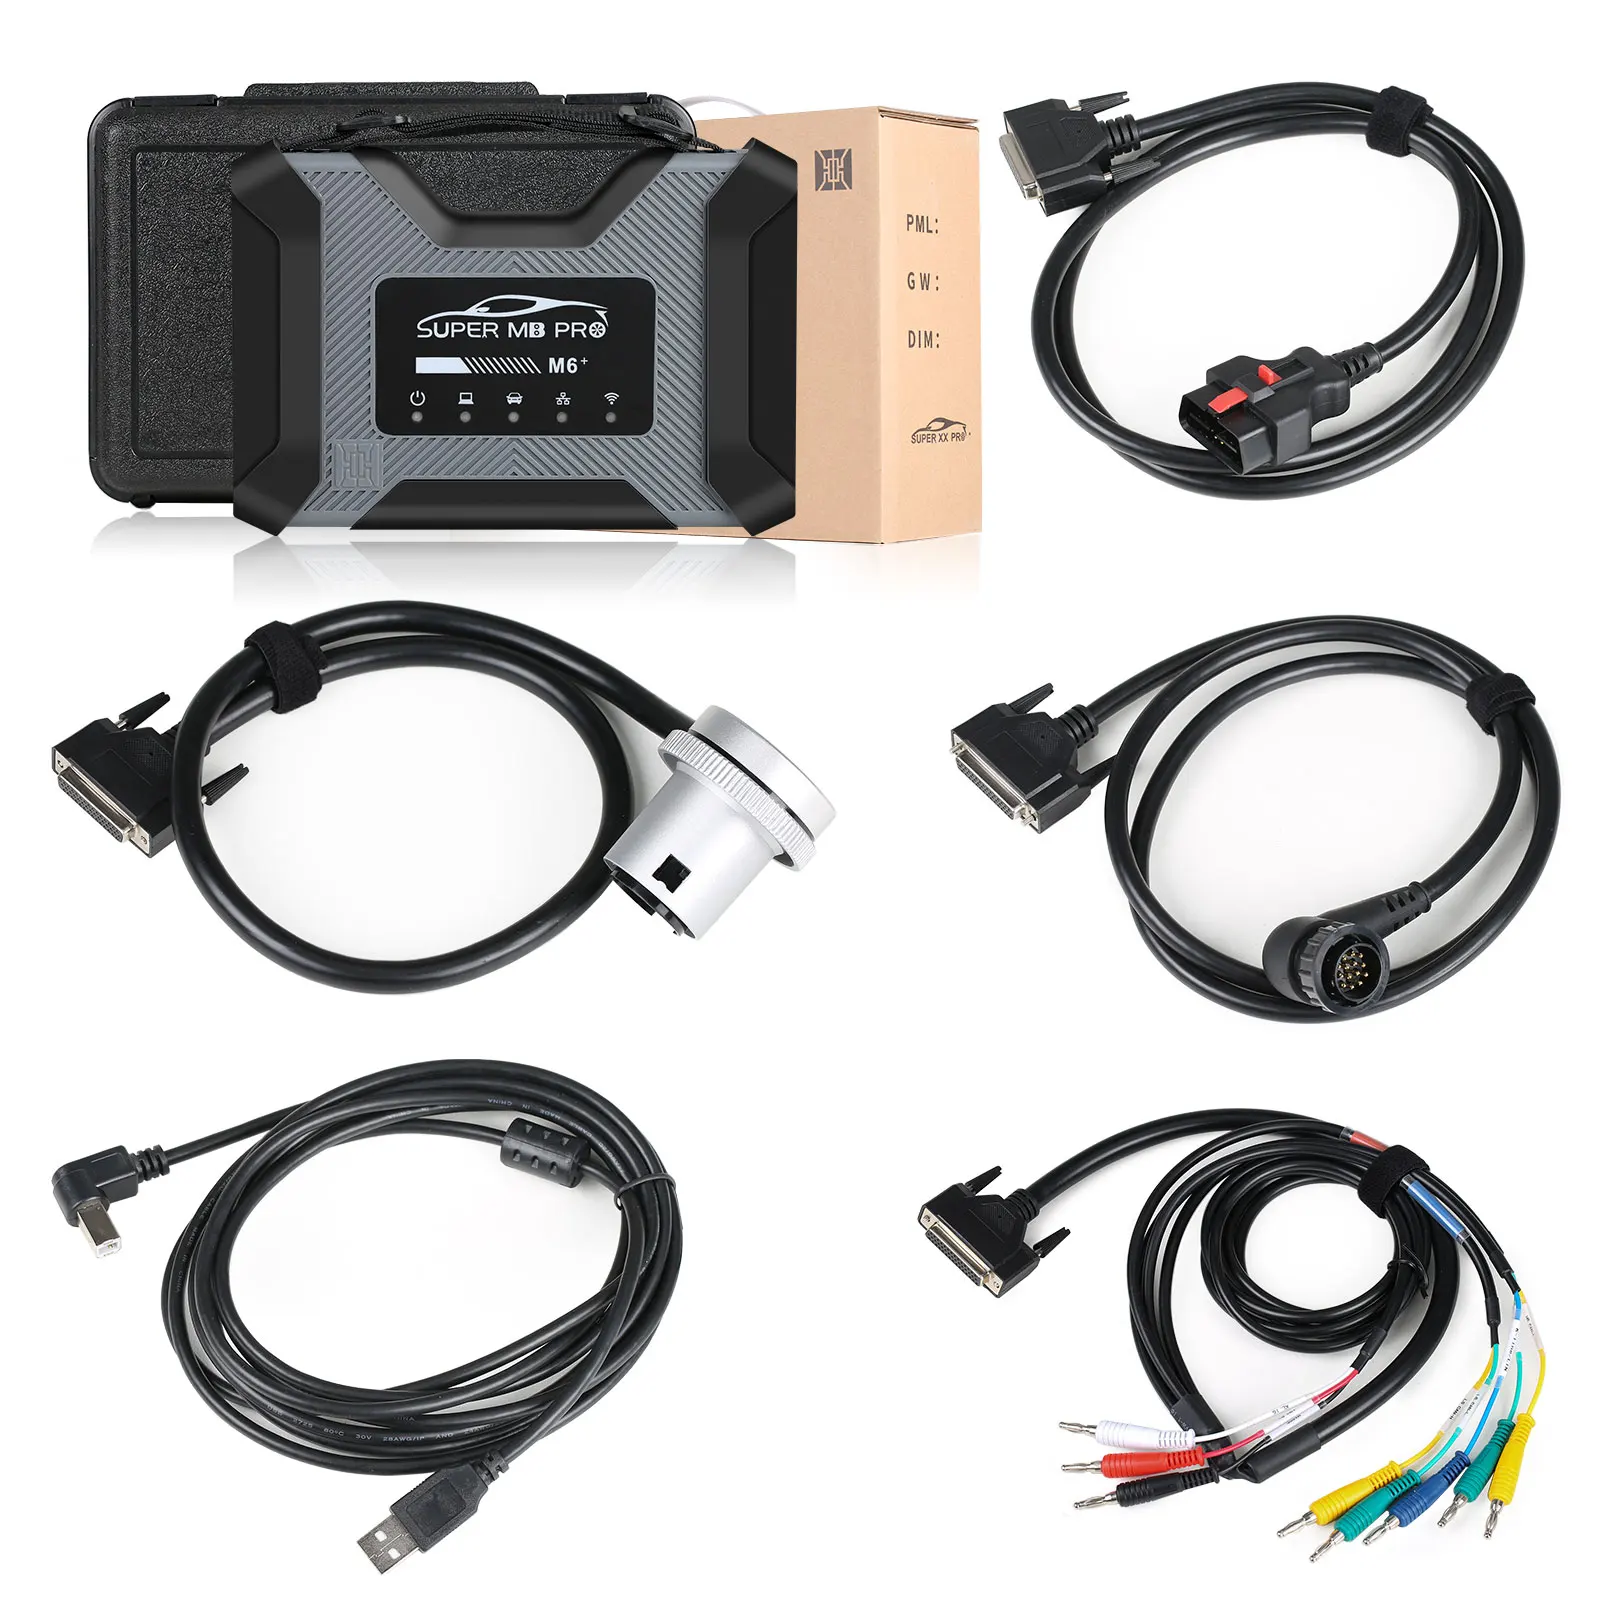 

WIFI SUPER MB PRO M6+ Full Version DoIP for Benz Diagnostic Scanner Supports for BMW Aicoder, E-sys